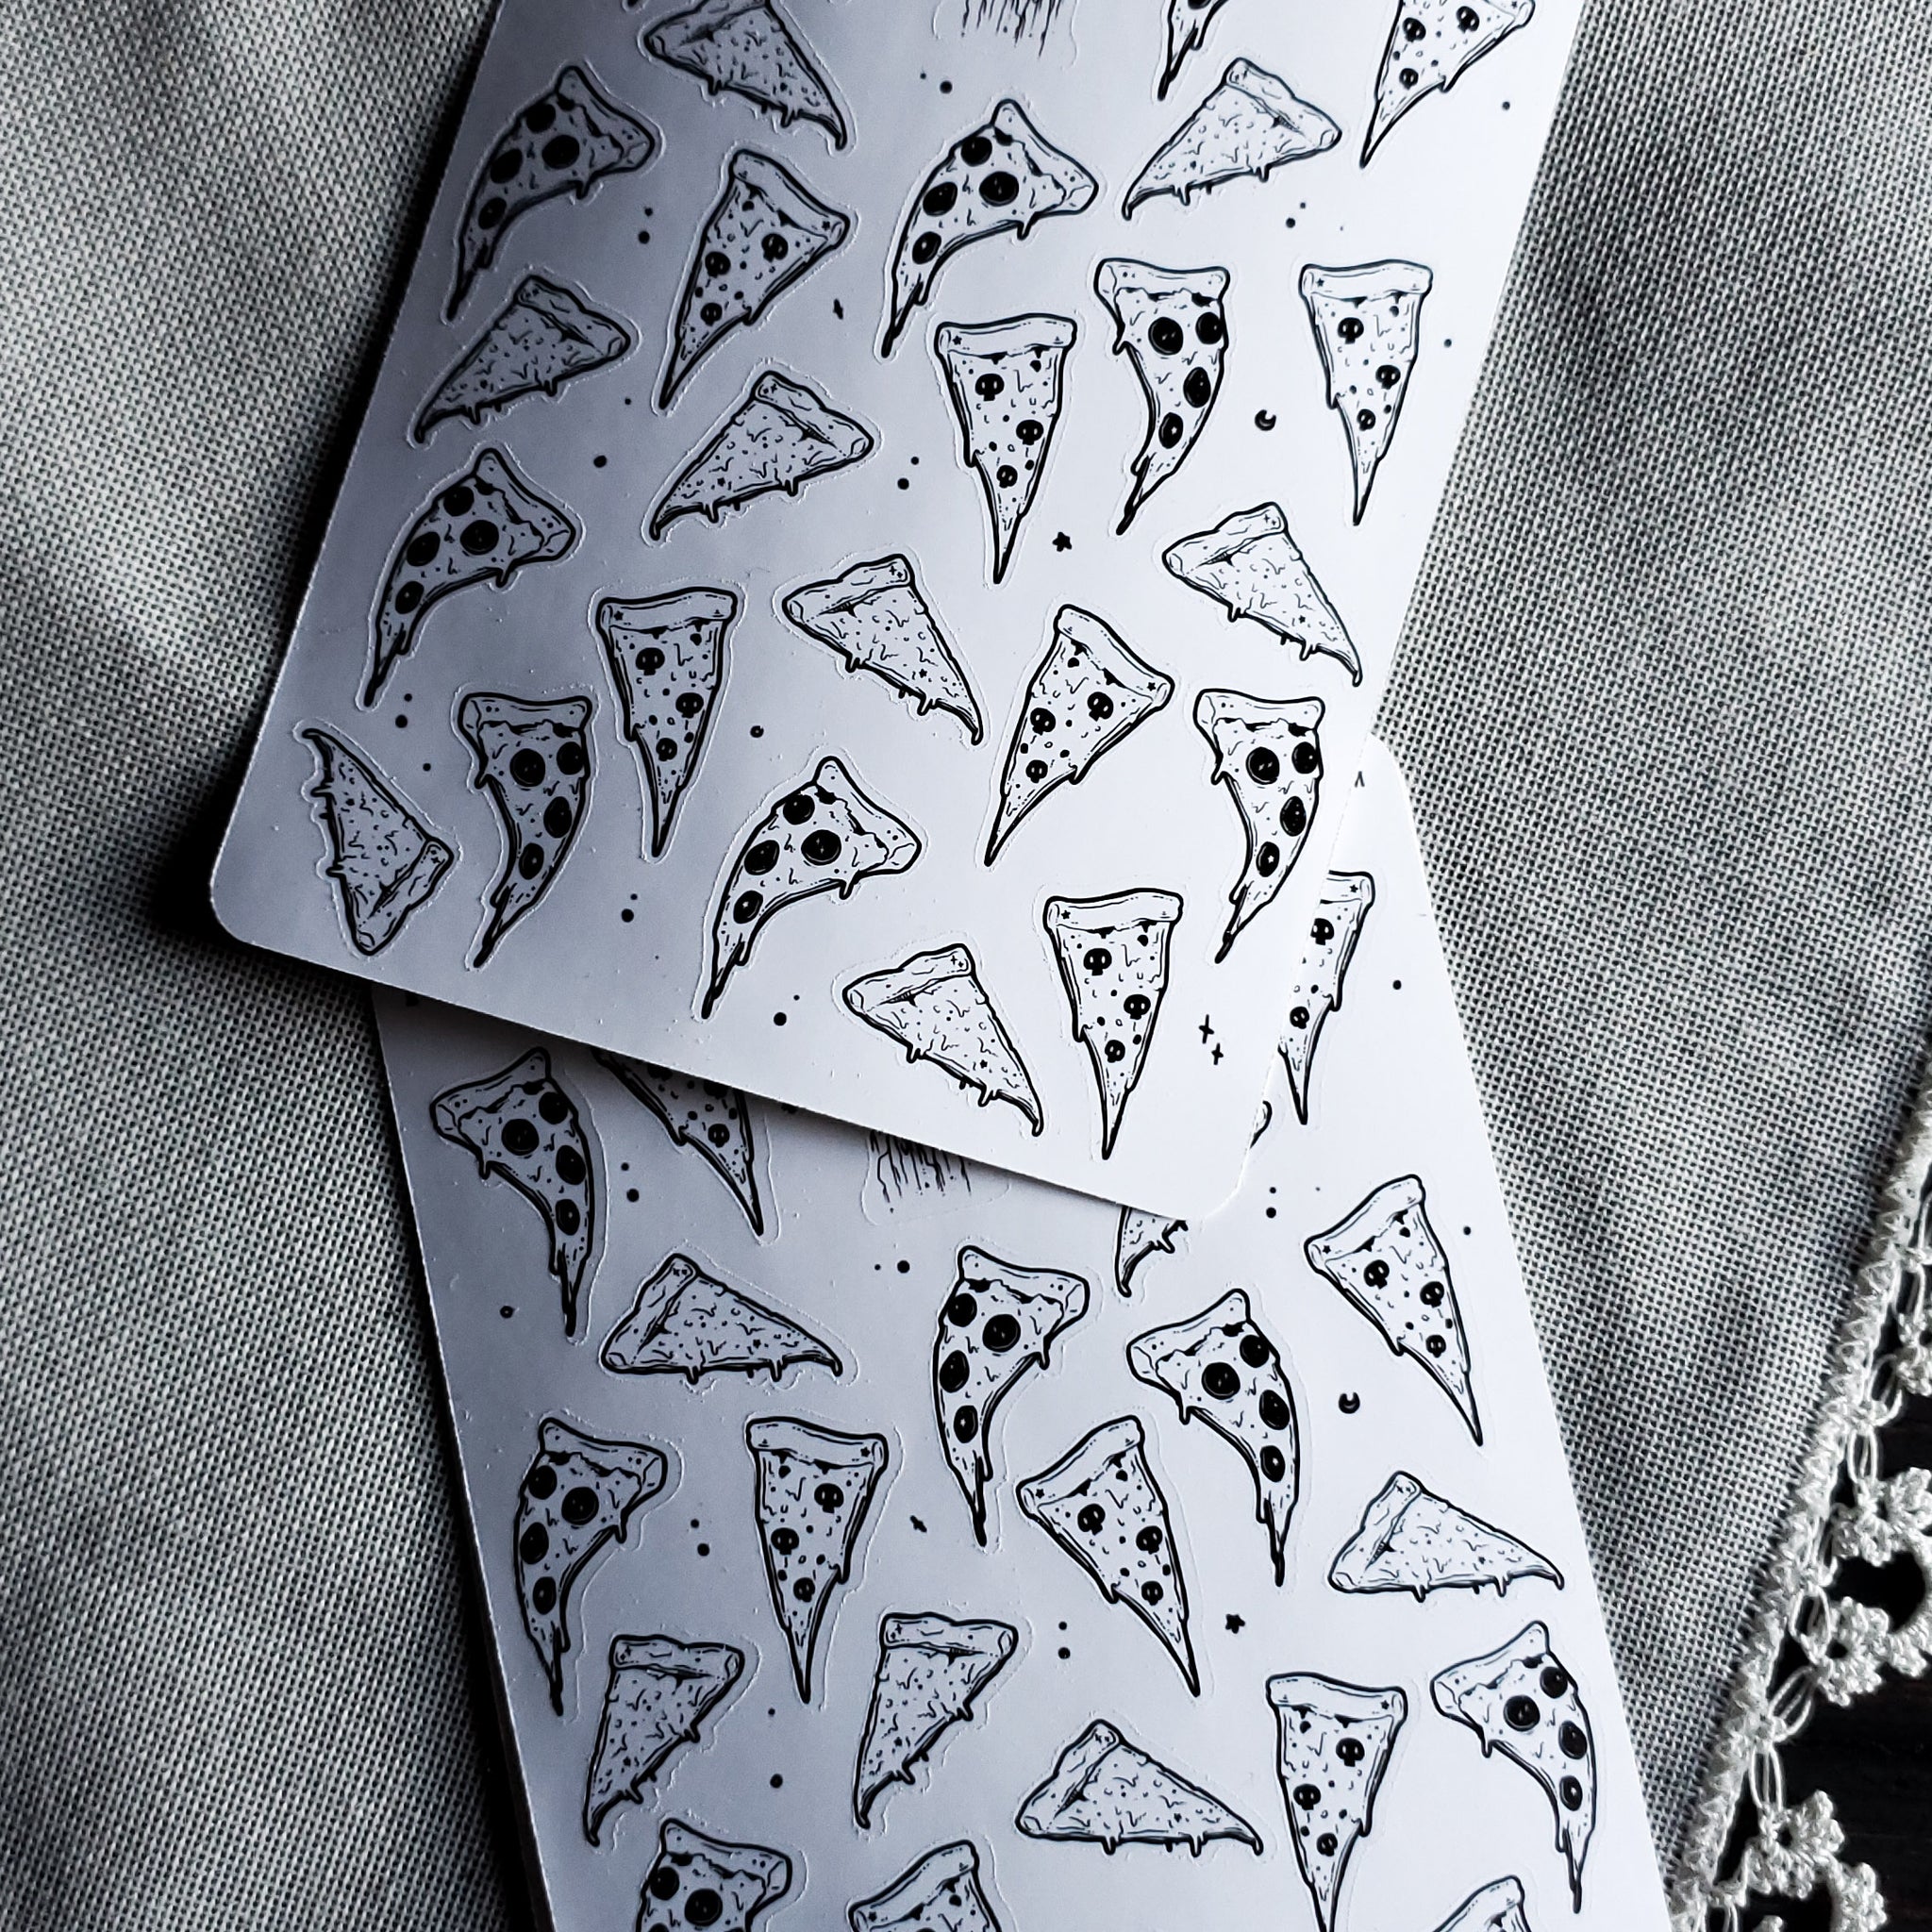 Pizza STICKER sheet - Lowbrow Misfits / White Stag Art